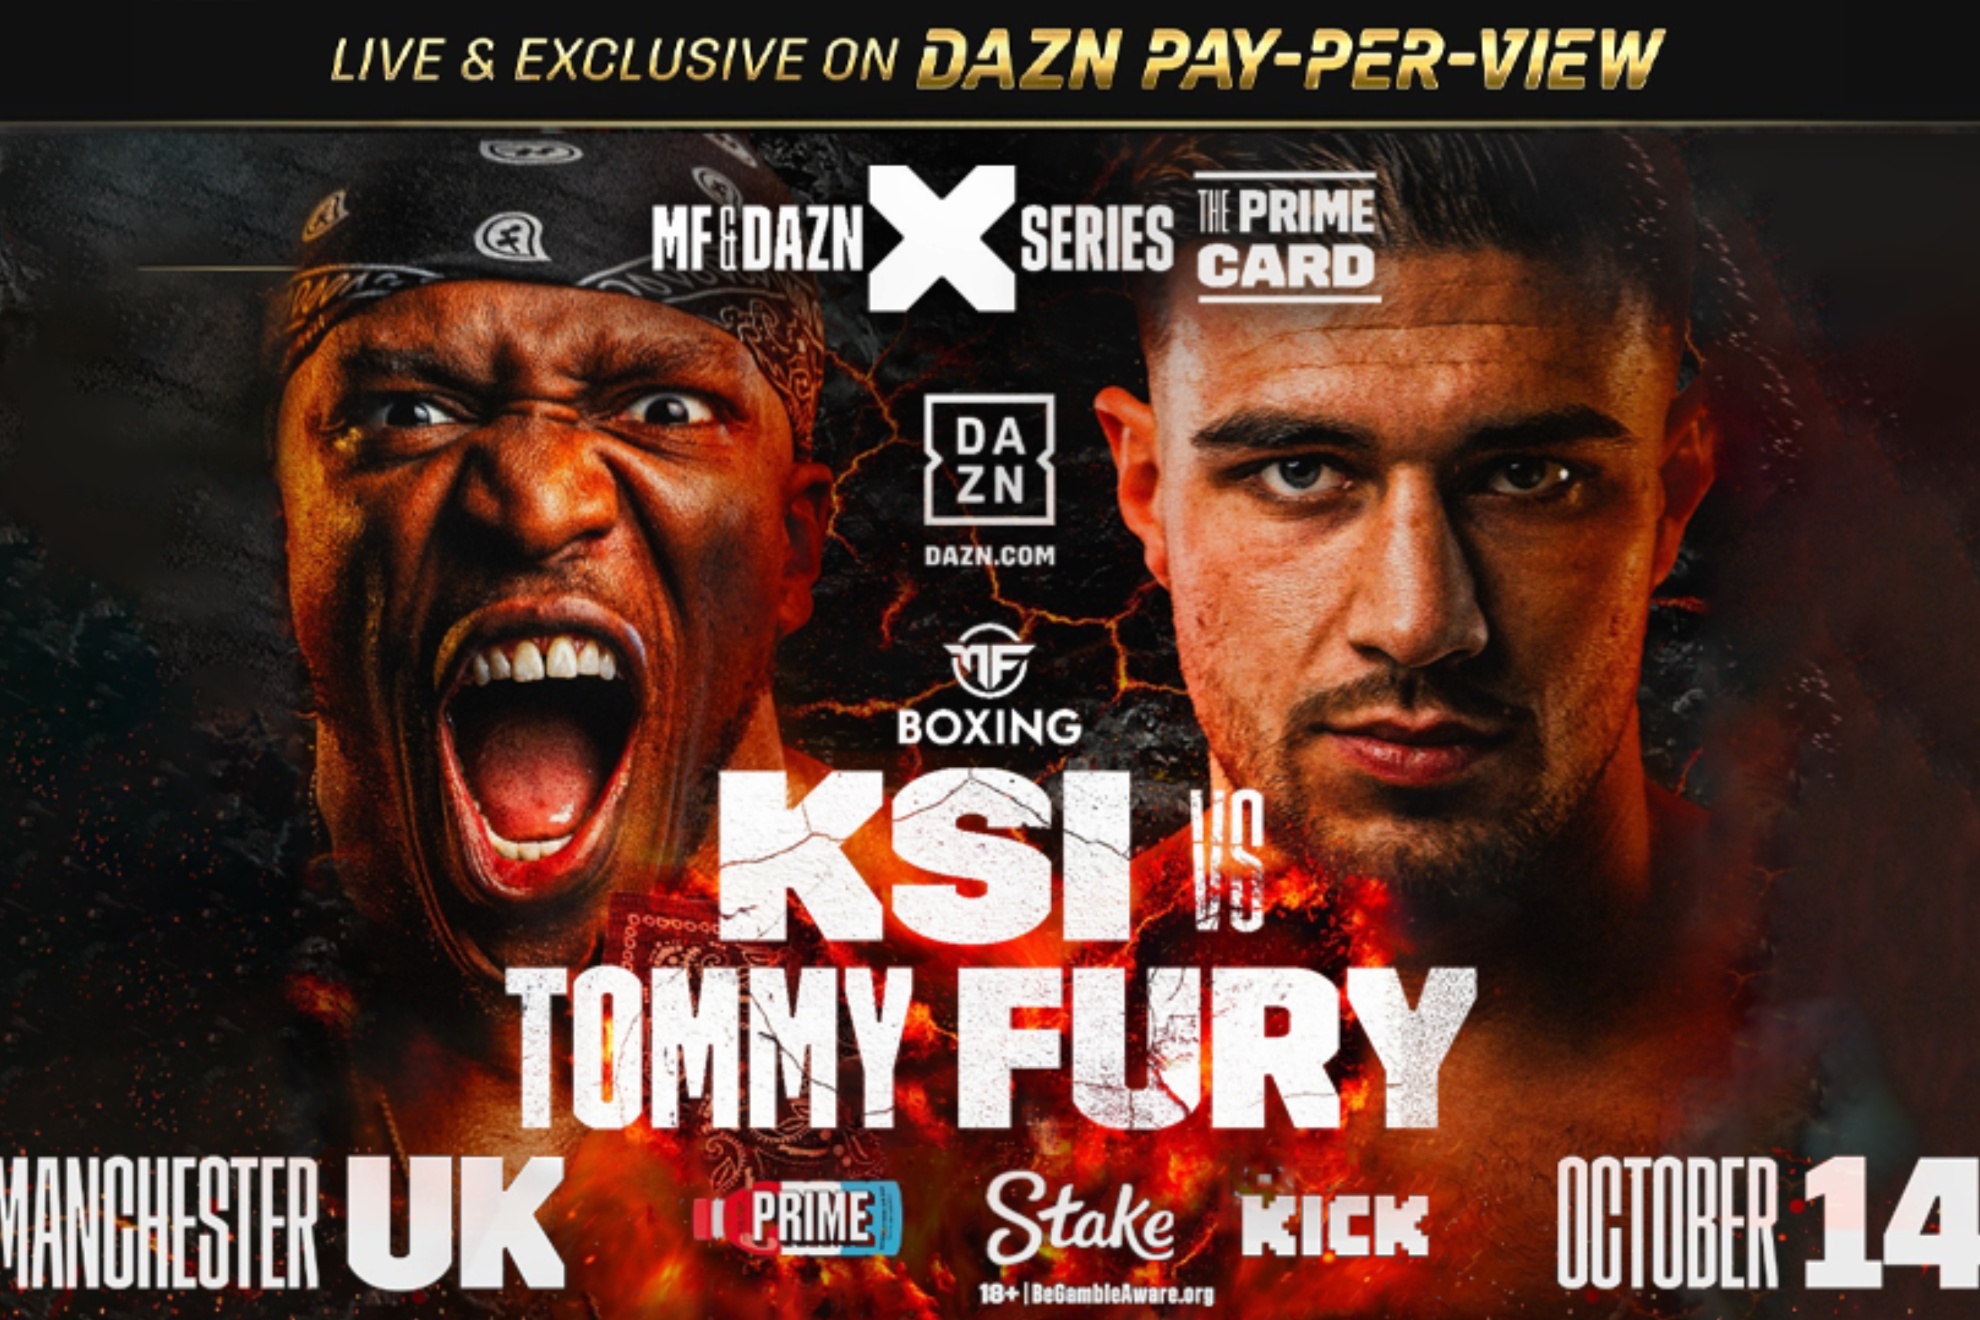 The KSI vs Tommy Fury fight will take place this Saturday, October 14